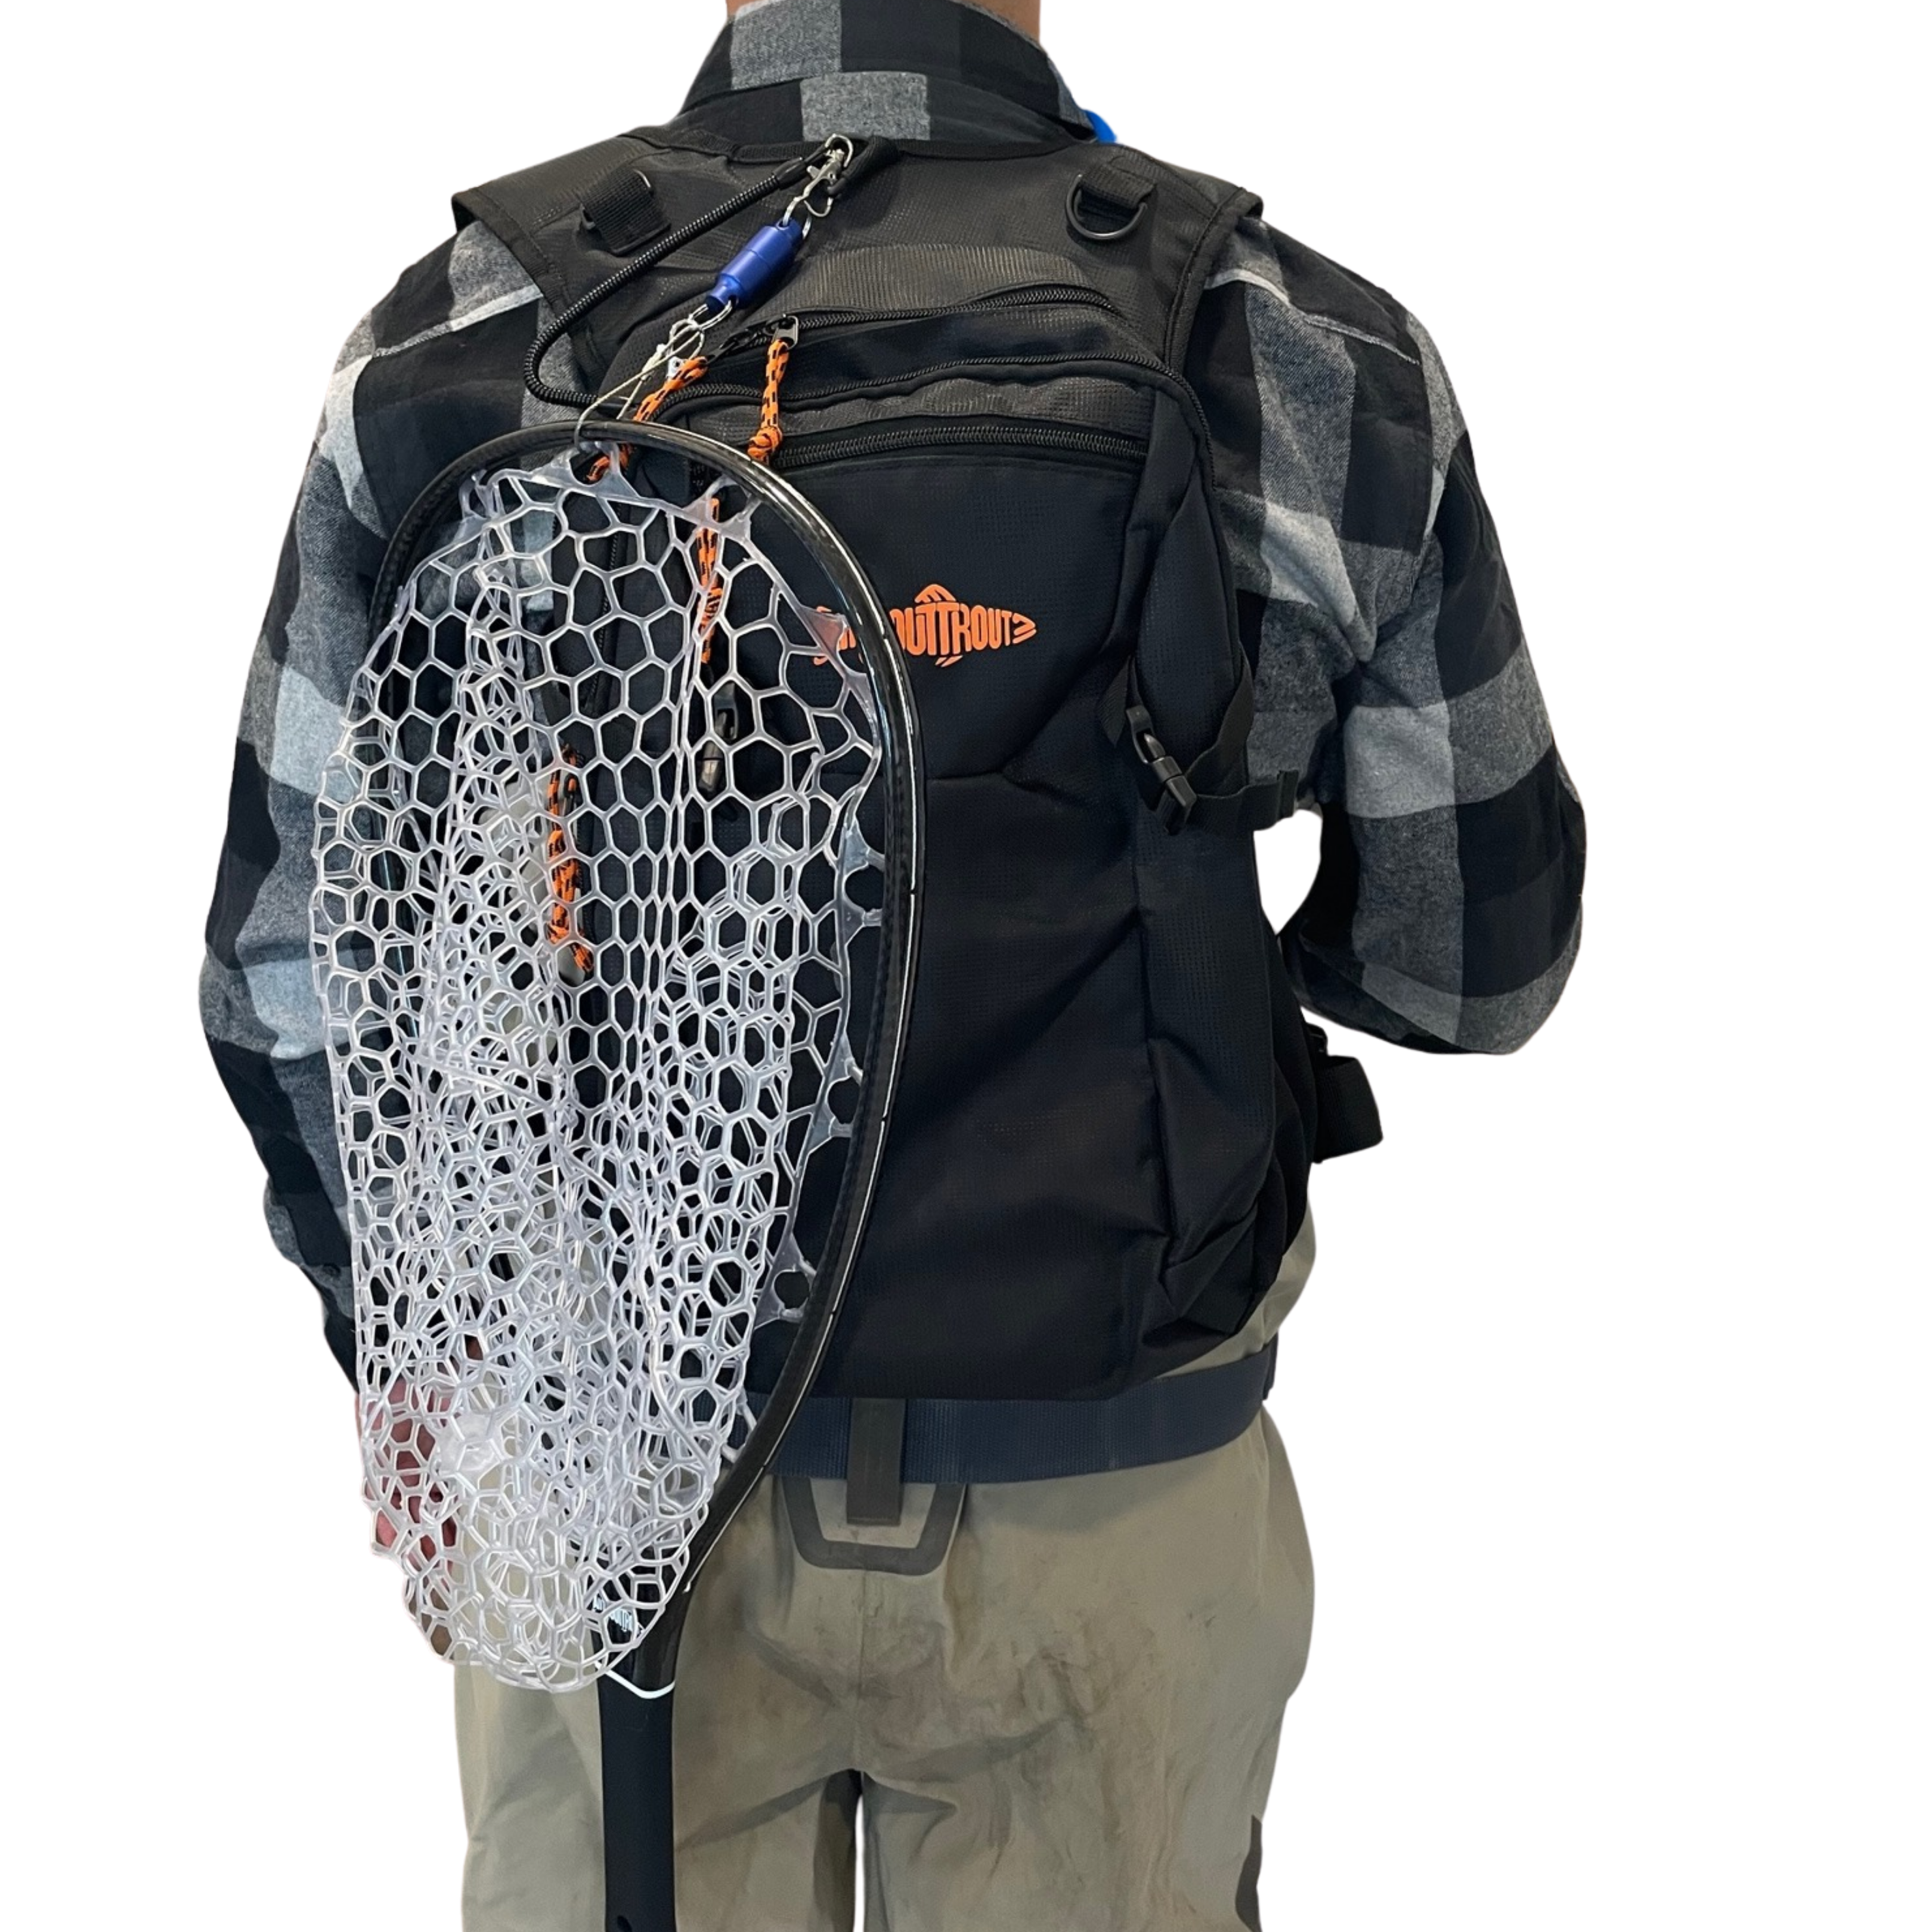 Tailwater Tech Pack - 2022 Model